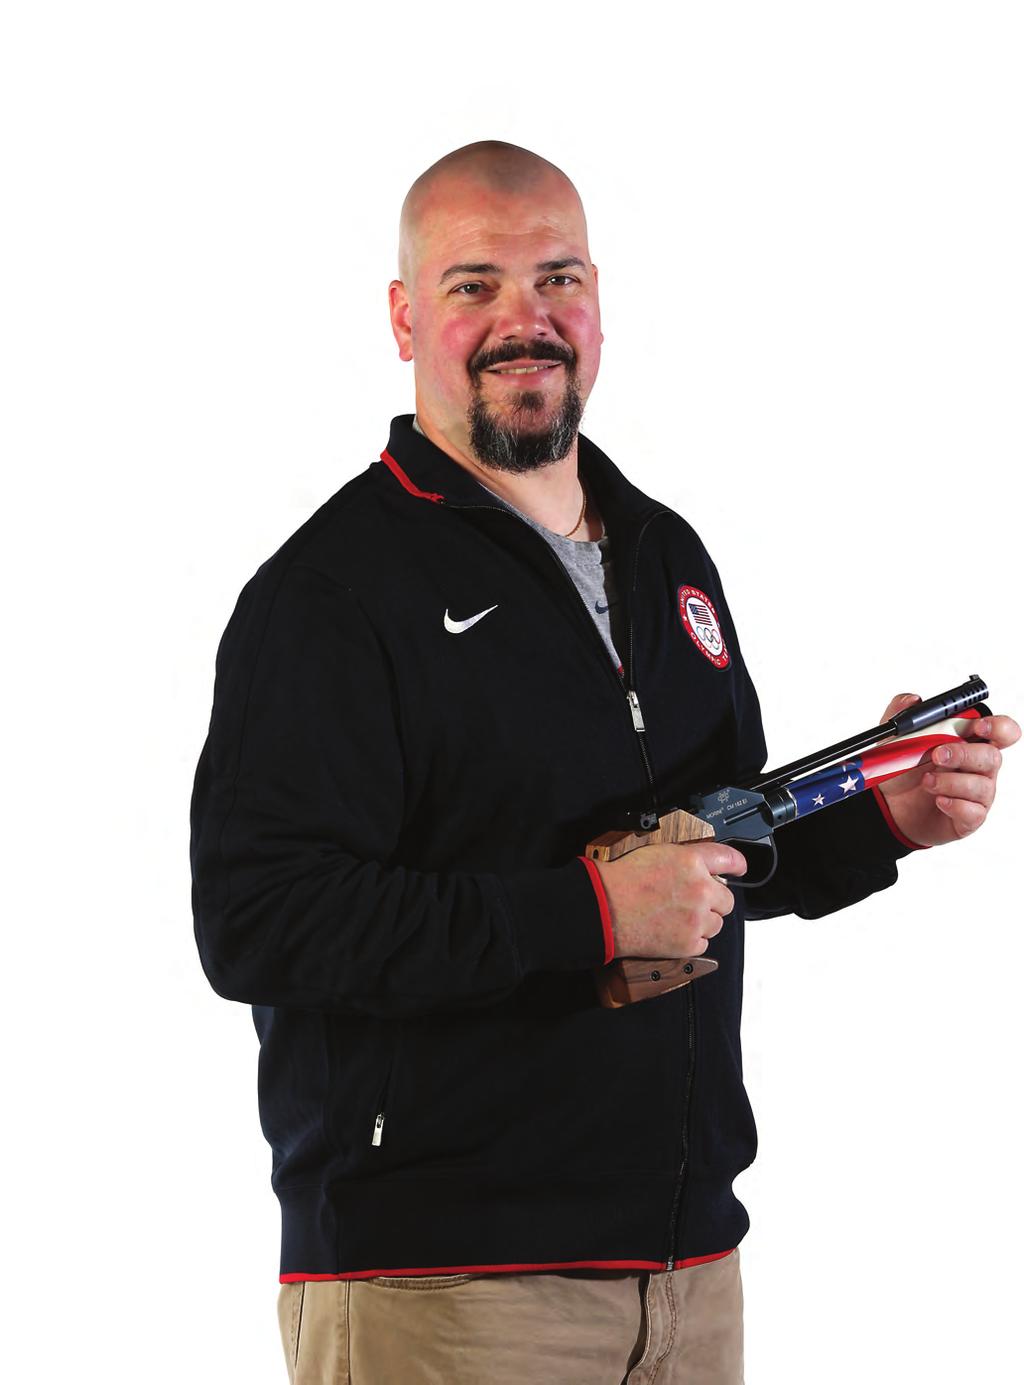 P OLYMPIC TEAM Jason Turner Men s 10m Air Pistol Date of Birth: 01/31/1975 hometown: Rochester, NY birthplace: Rochester, NY firearm: Morini 2012 National Championships, Gold Medalist 2008 Olympic